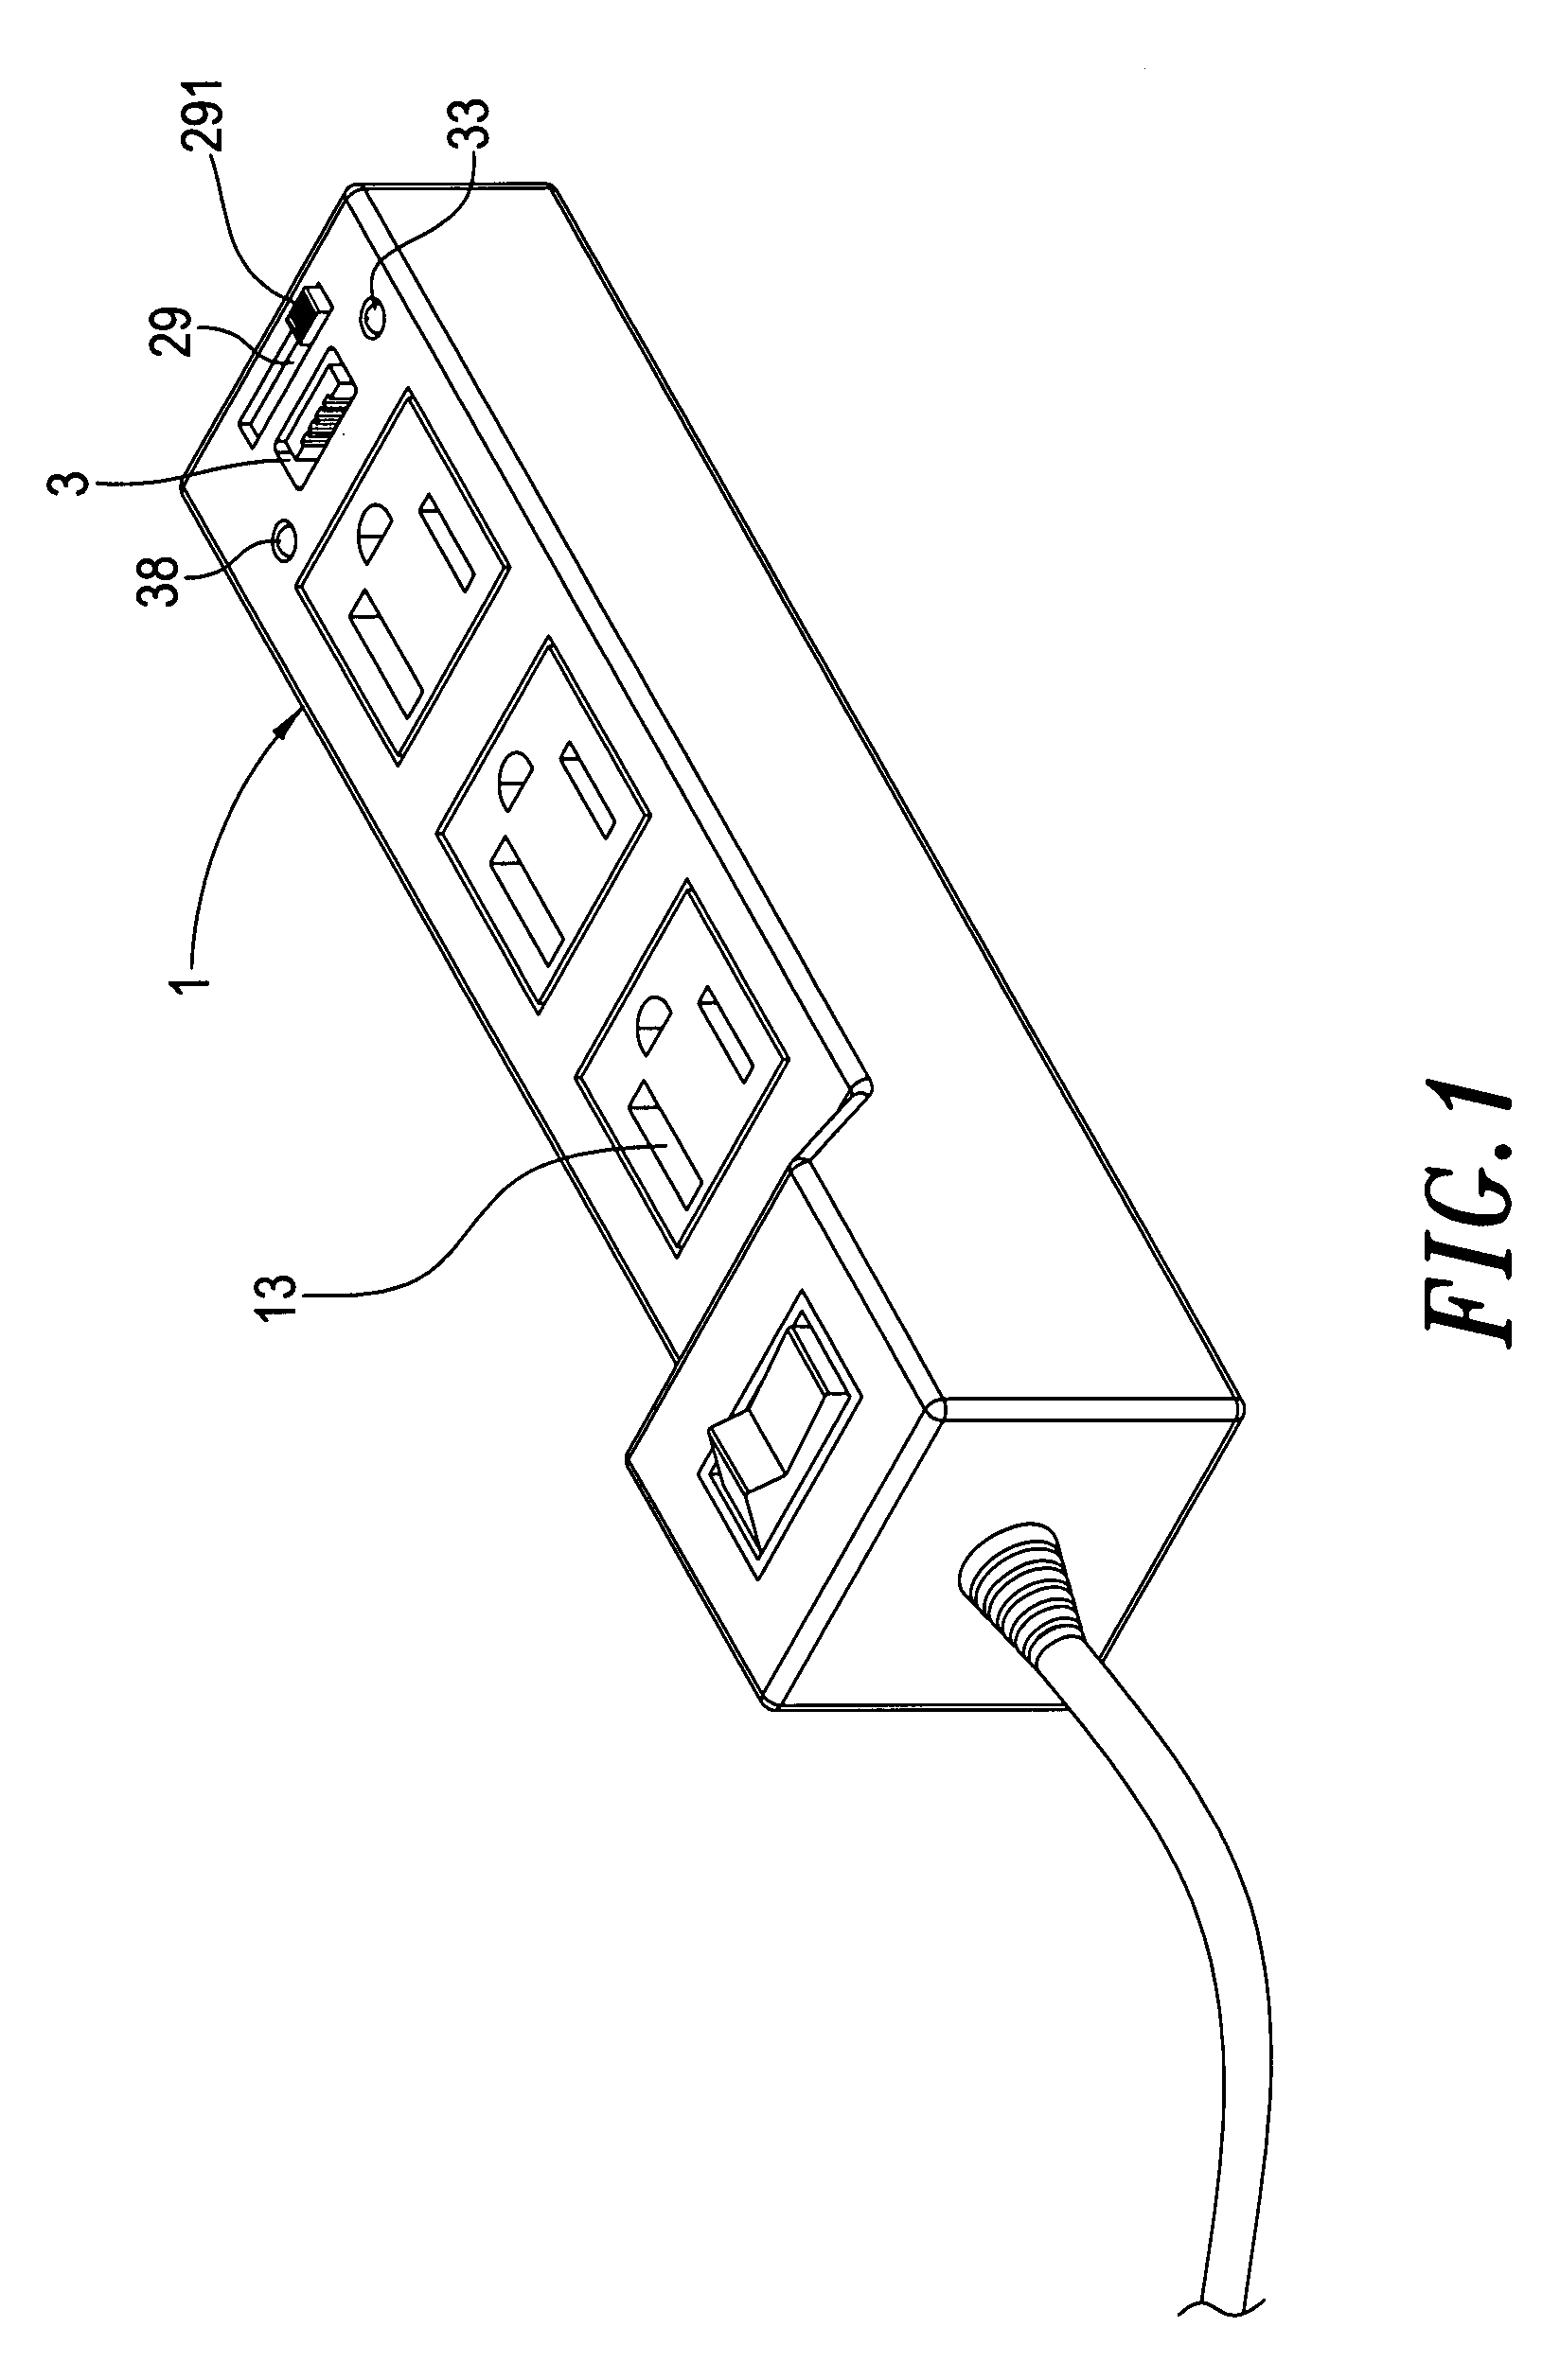 Charge apparatus of an extension cord plug